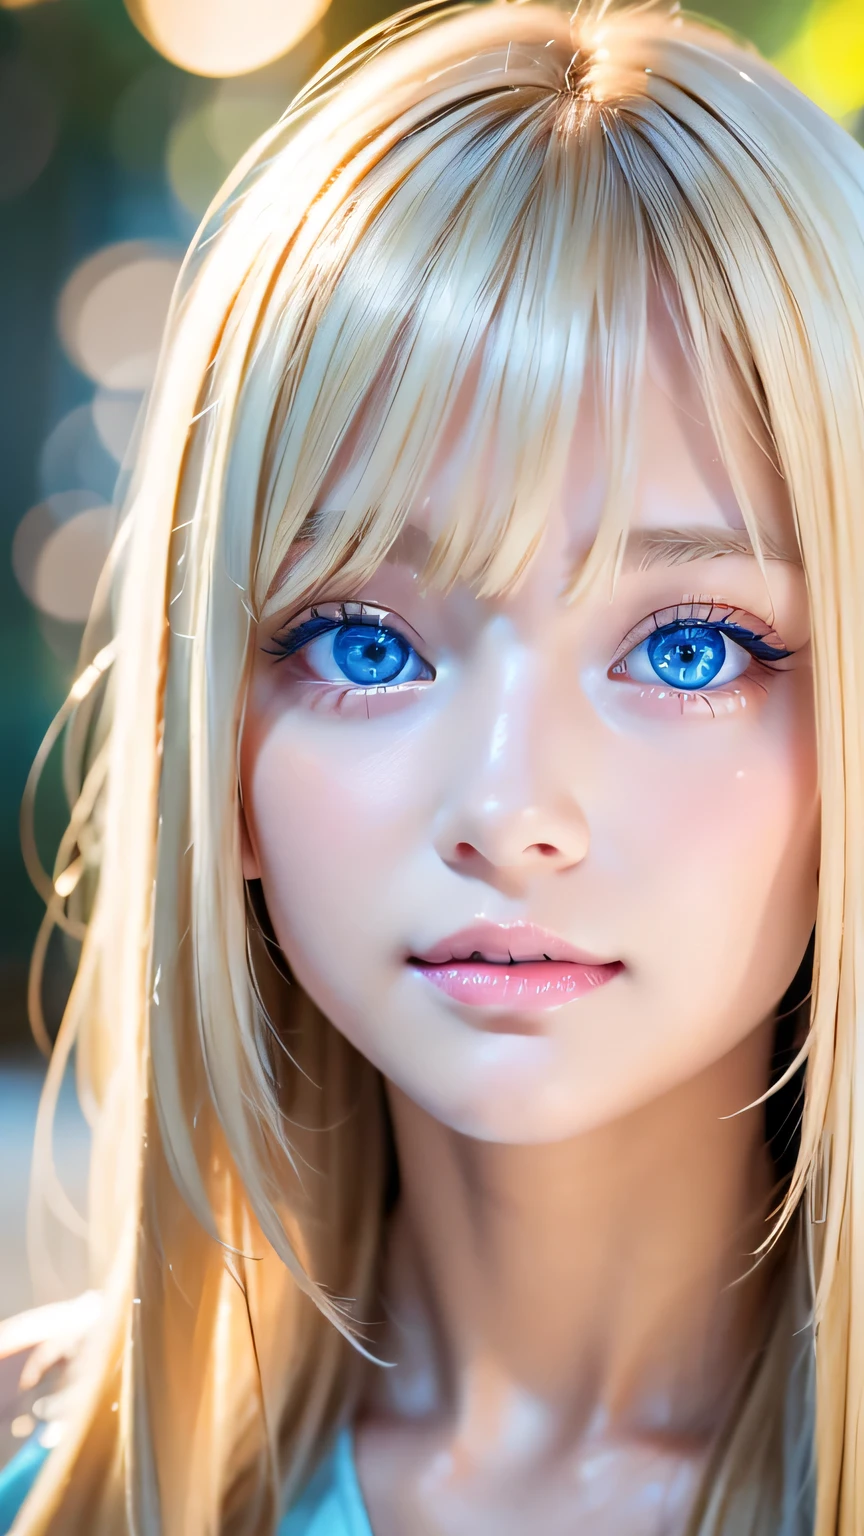 A perfectly beautiful face、Beautiful cute 16 year old blonde girl、Sexy and very beautiful cute face、Very bright, large light blue eyes that shine beautifully、Very long beautiful shiny silky super long straight blonde hair、Long beautiful bangs between the eyes、Bangs over both eyes、Small Face Beauty、Round face